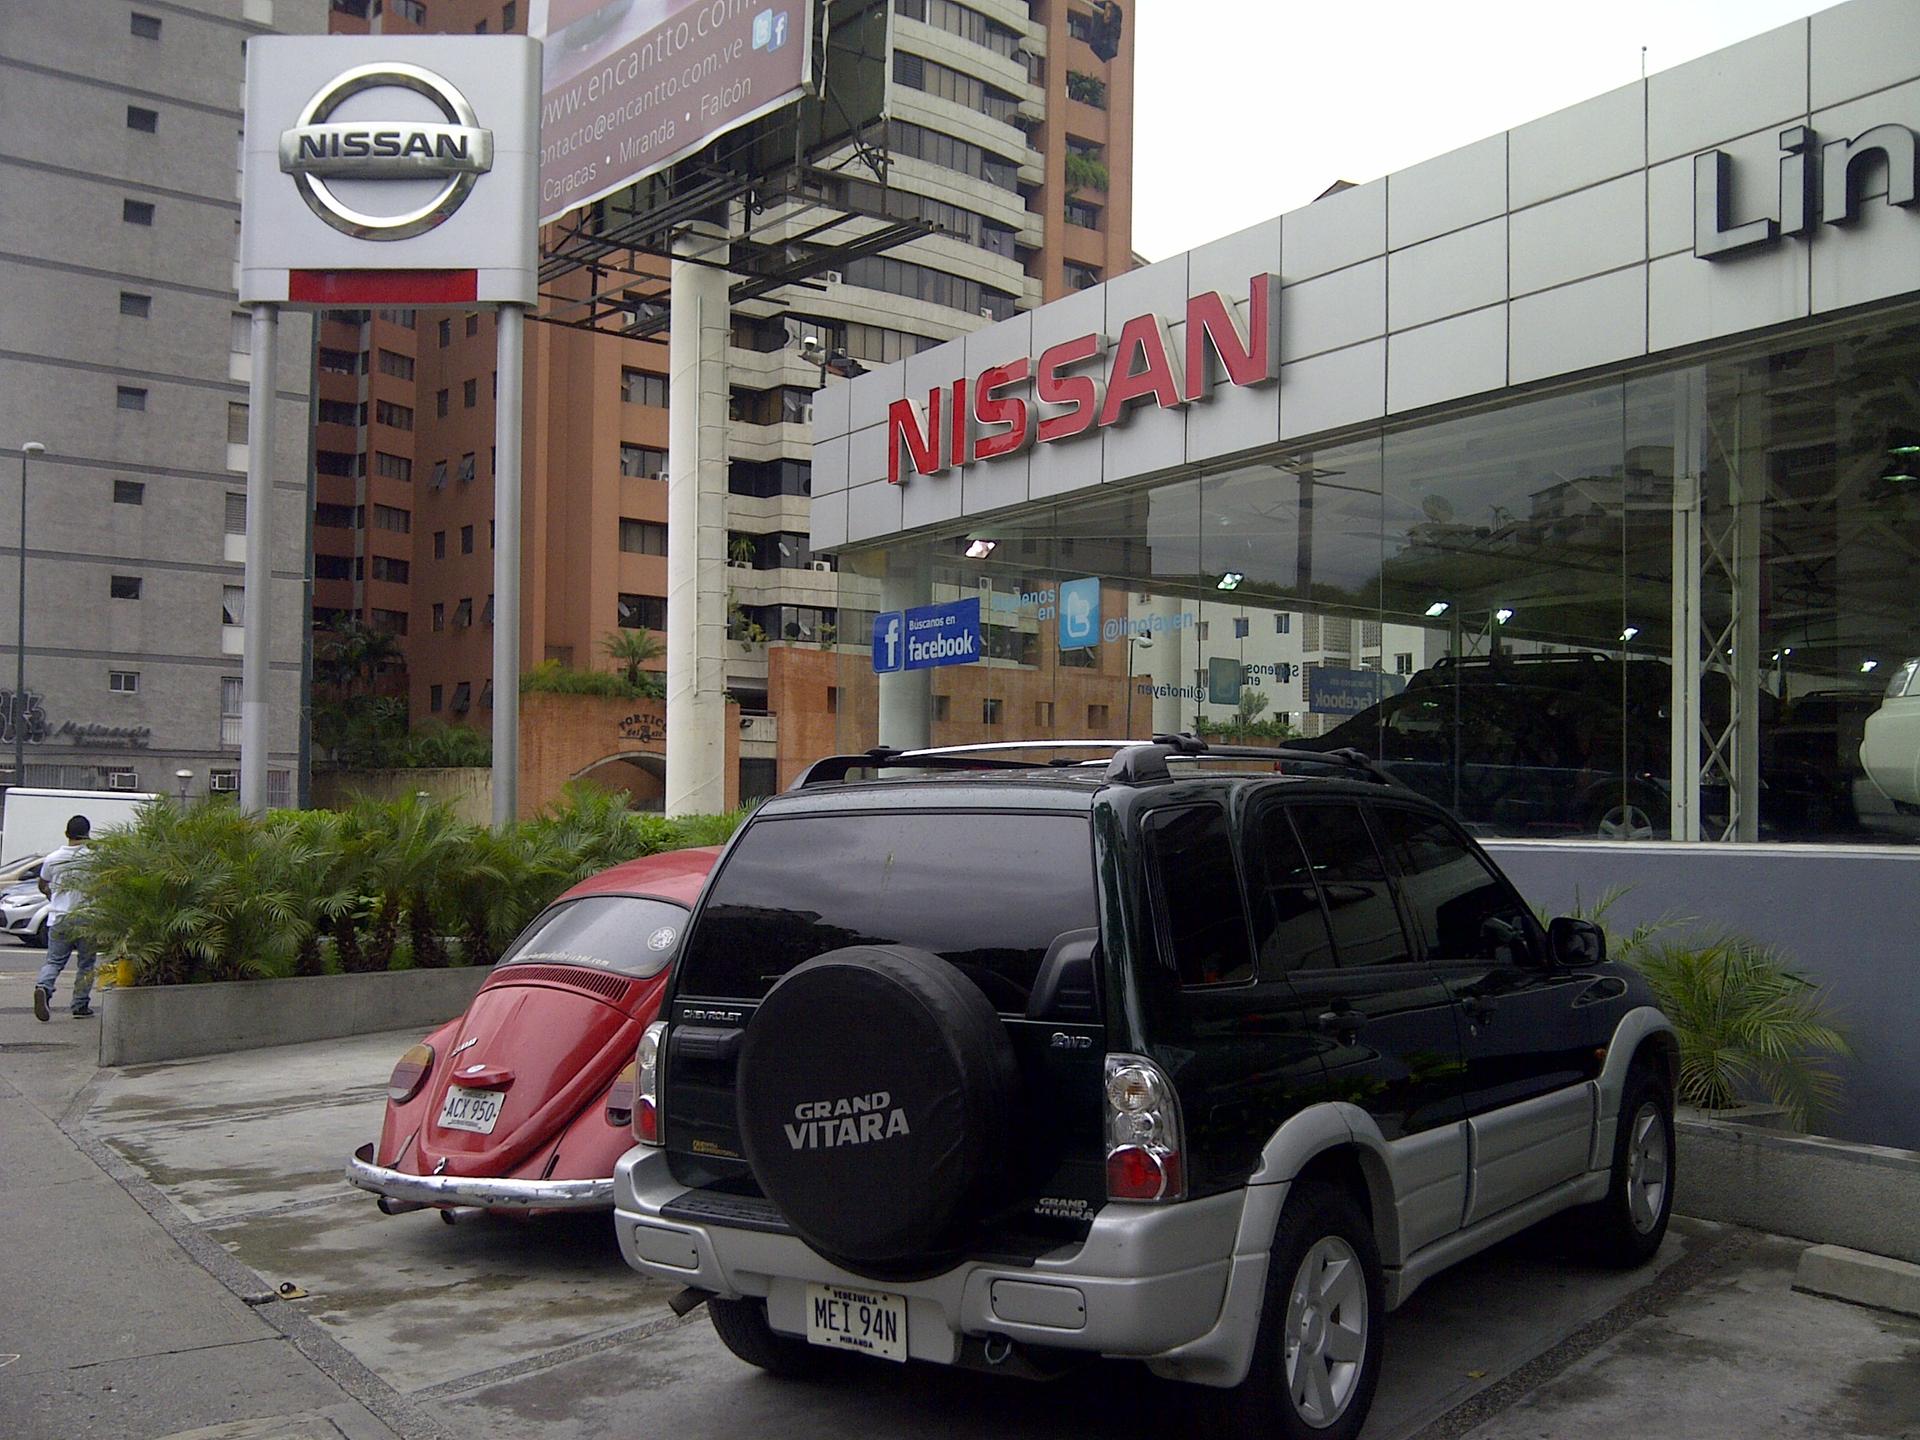 No new cars at this Nissan dealership in Caracas, Venezuela. 